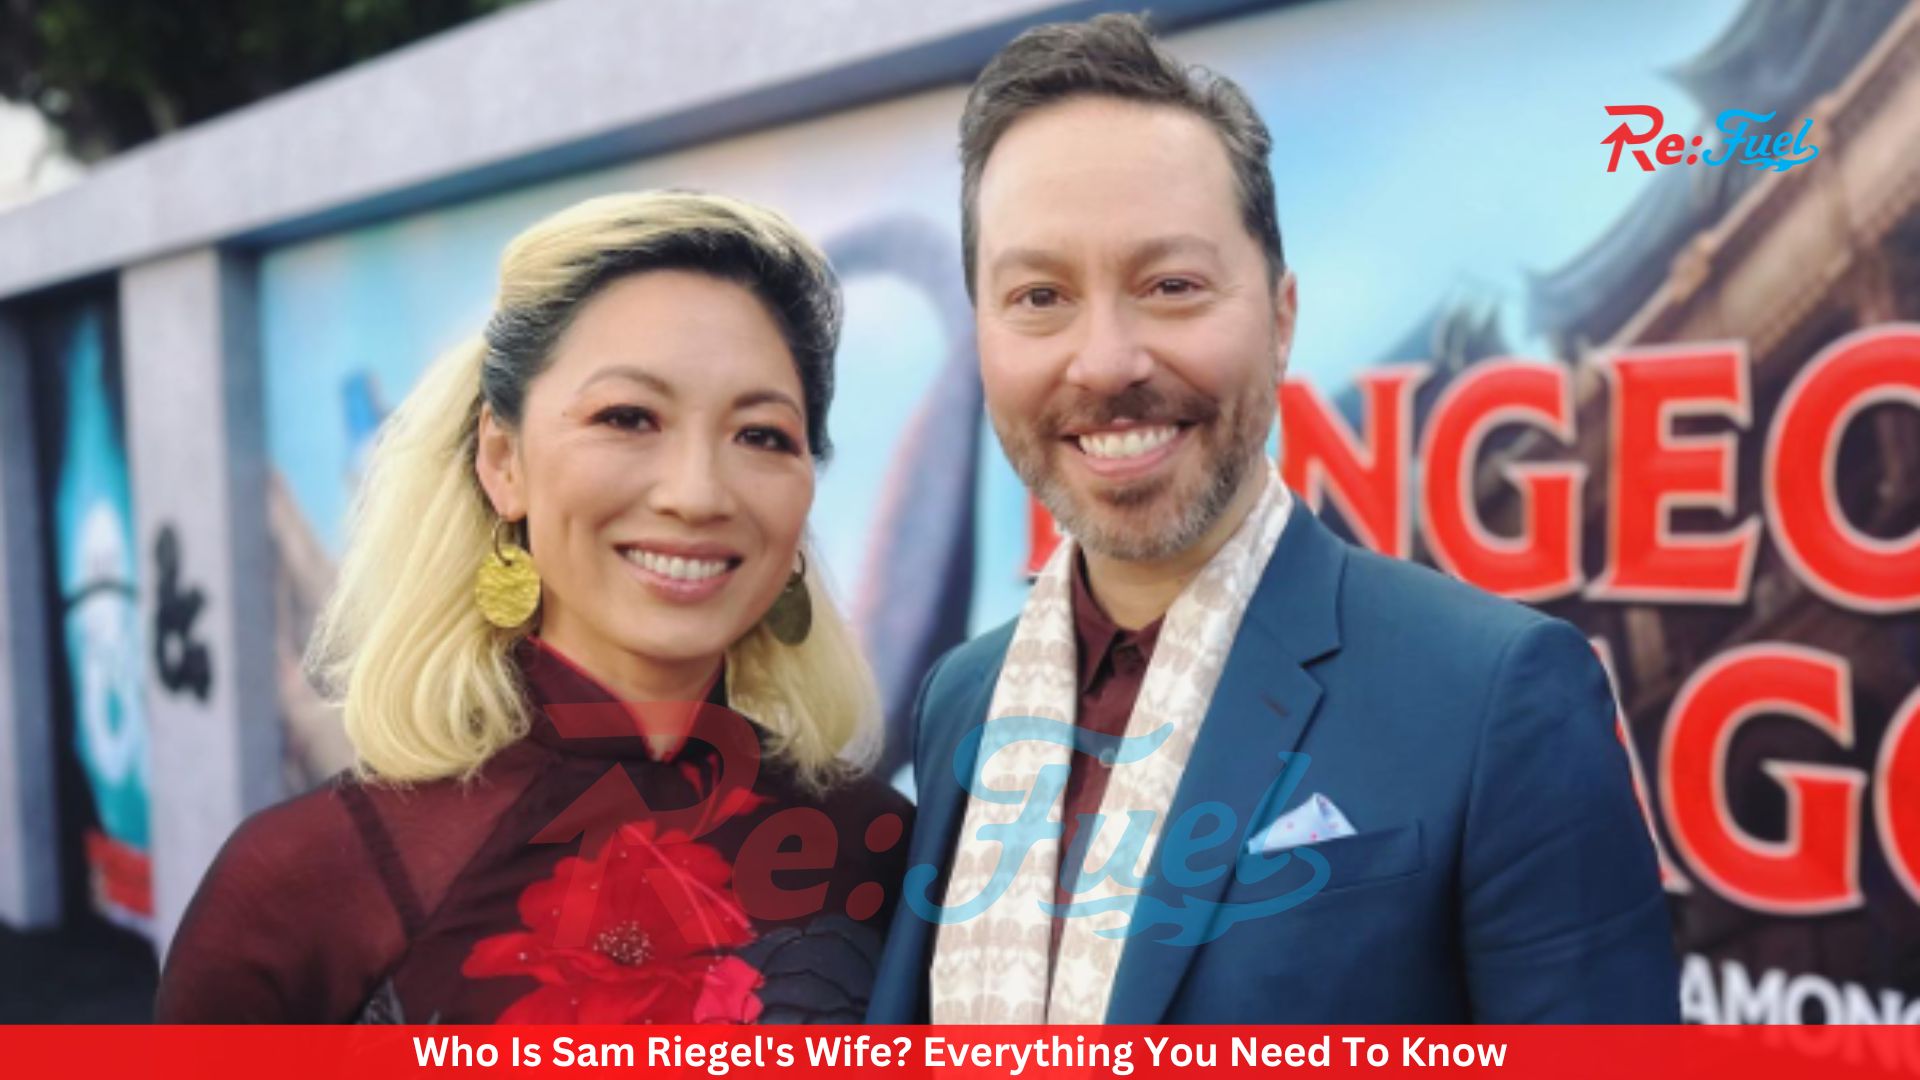 Who Is Sam Riegel's Wife? Everything You Need To Know